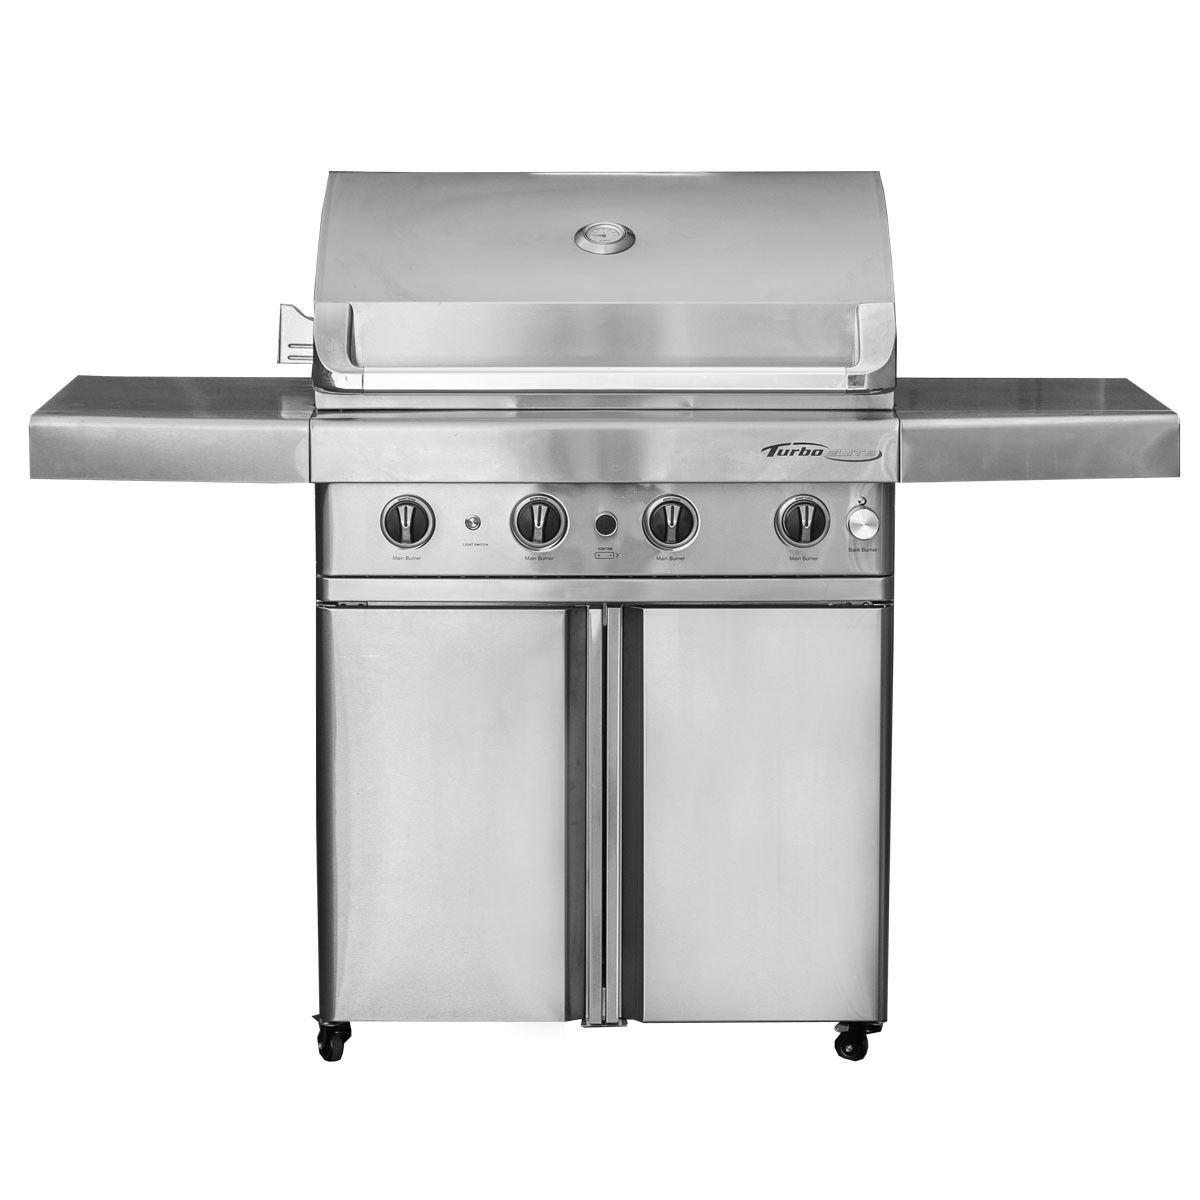 Gas Grill Brands Logo - Gas & Charcoal Barbecue Grills | Islands, Heaters & Patio Furniture ...